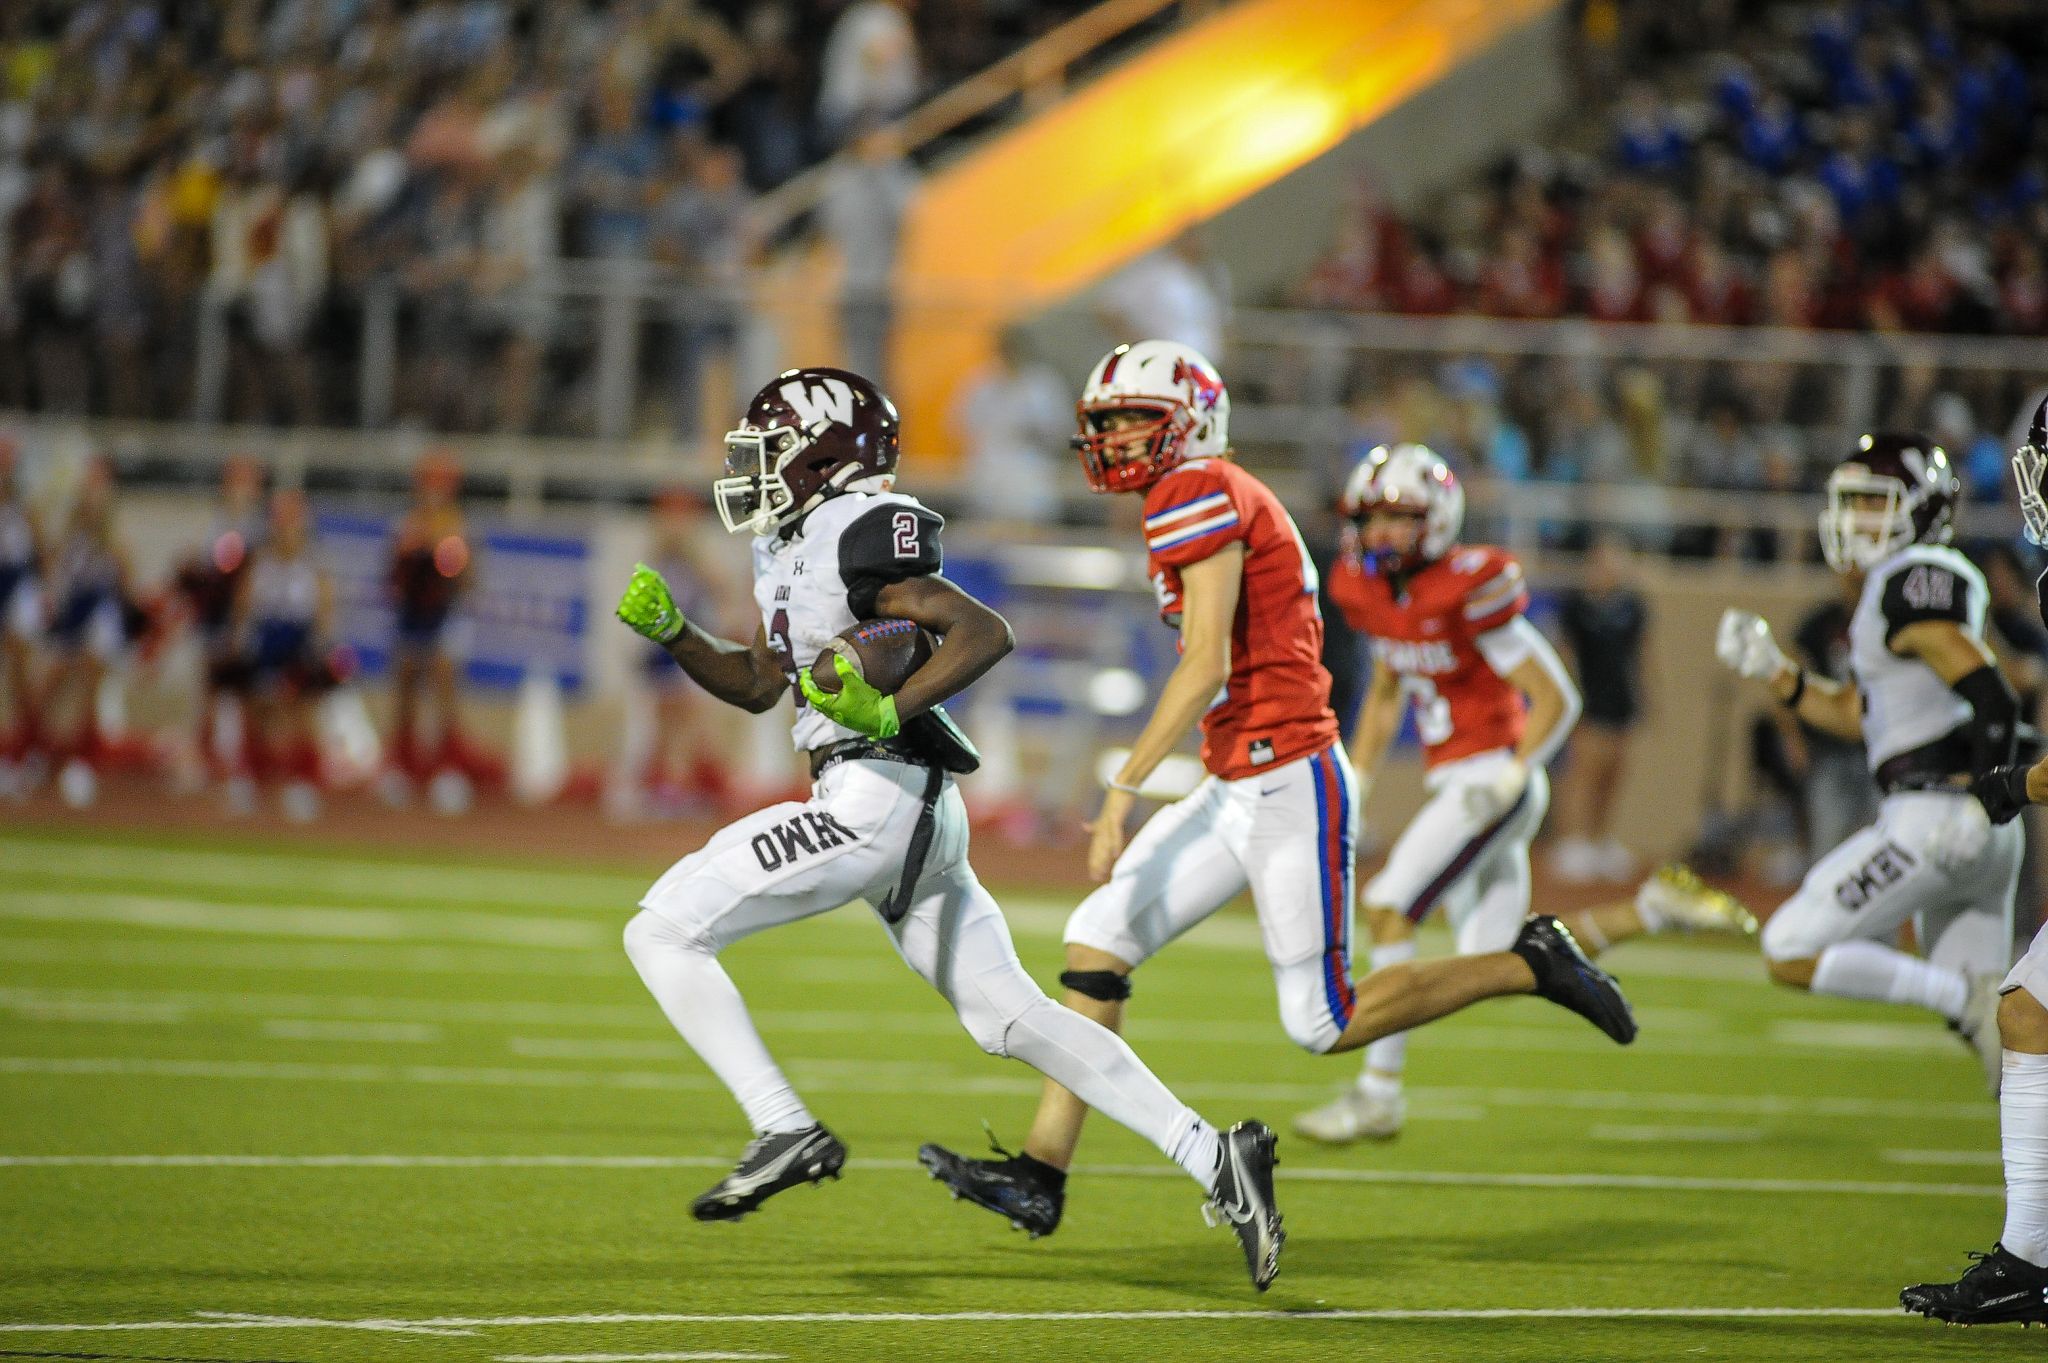 Missed opportunities cost Wylie in thriller against JJ Pearce